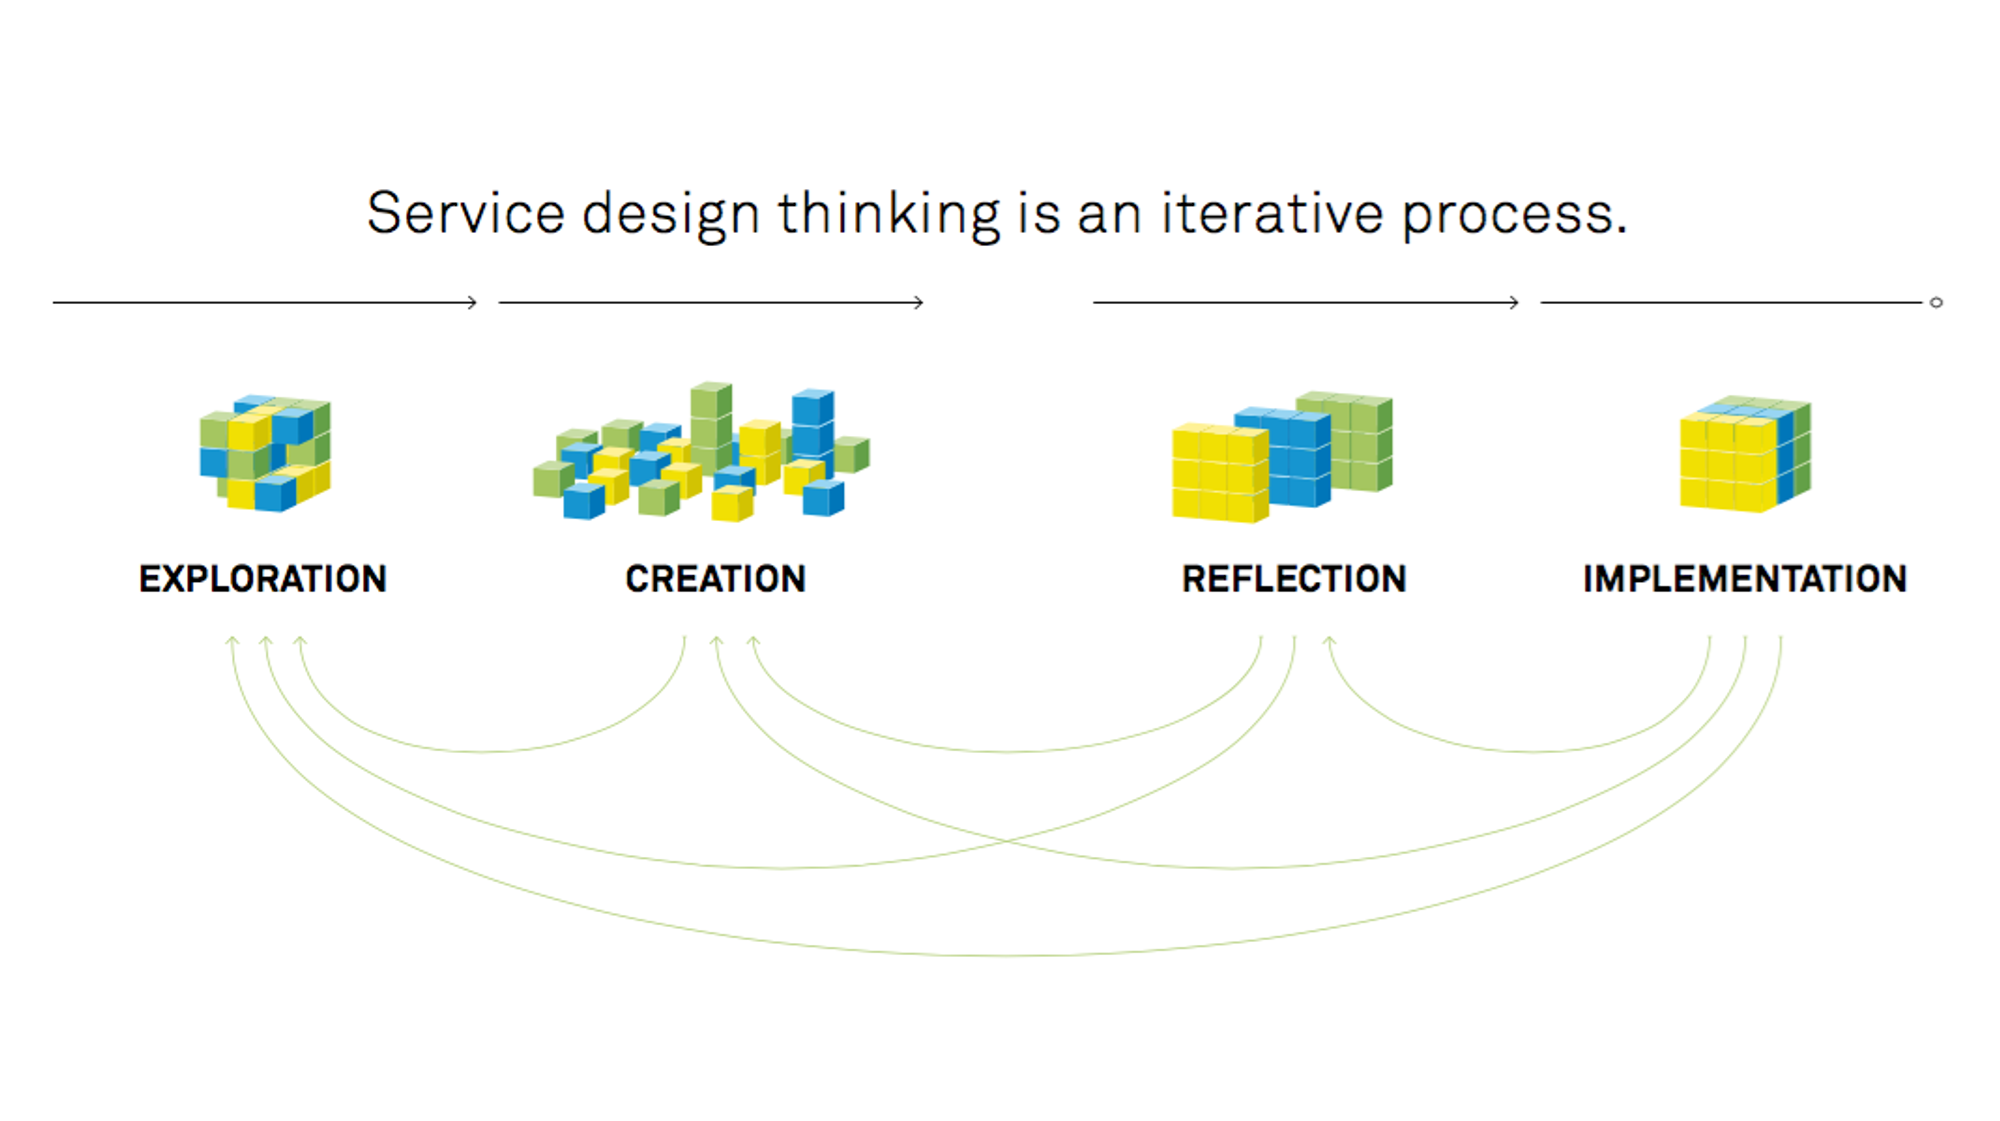 Reproduced from: Stickdorn & Scheider 2011, The Service Design Thinking